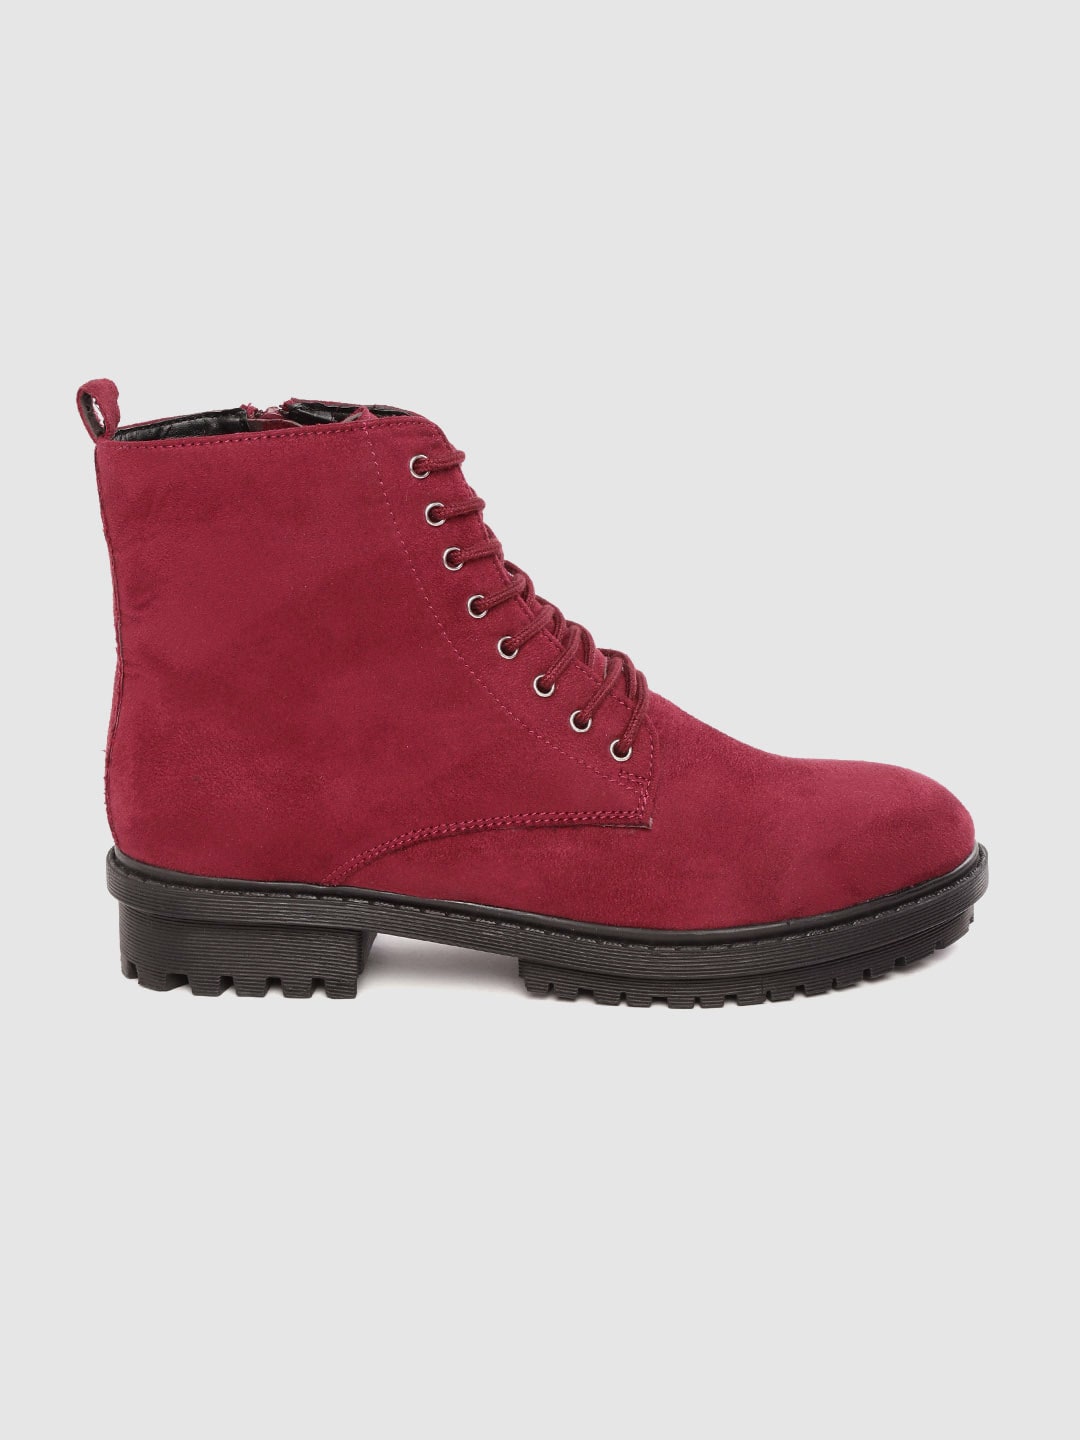 Roadster Women Maroon Solid Mid-Top Flat Boots with Suede Finish Price in India